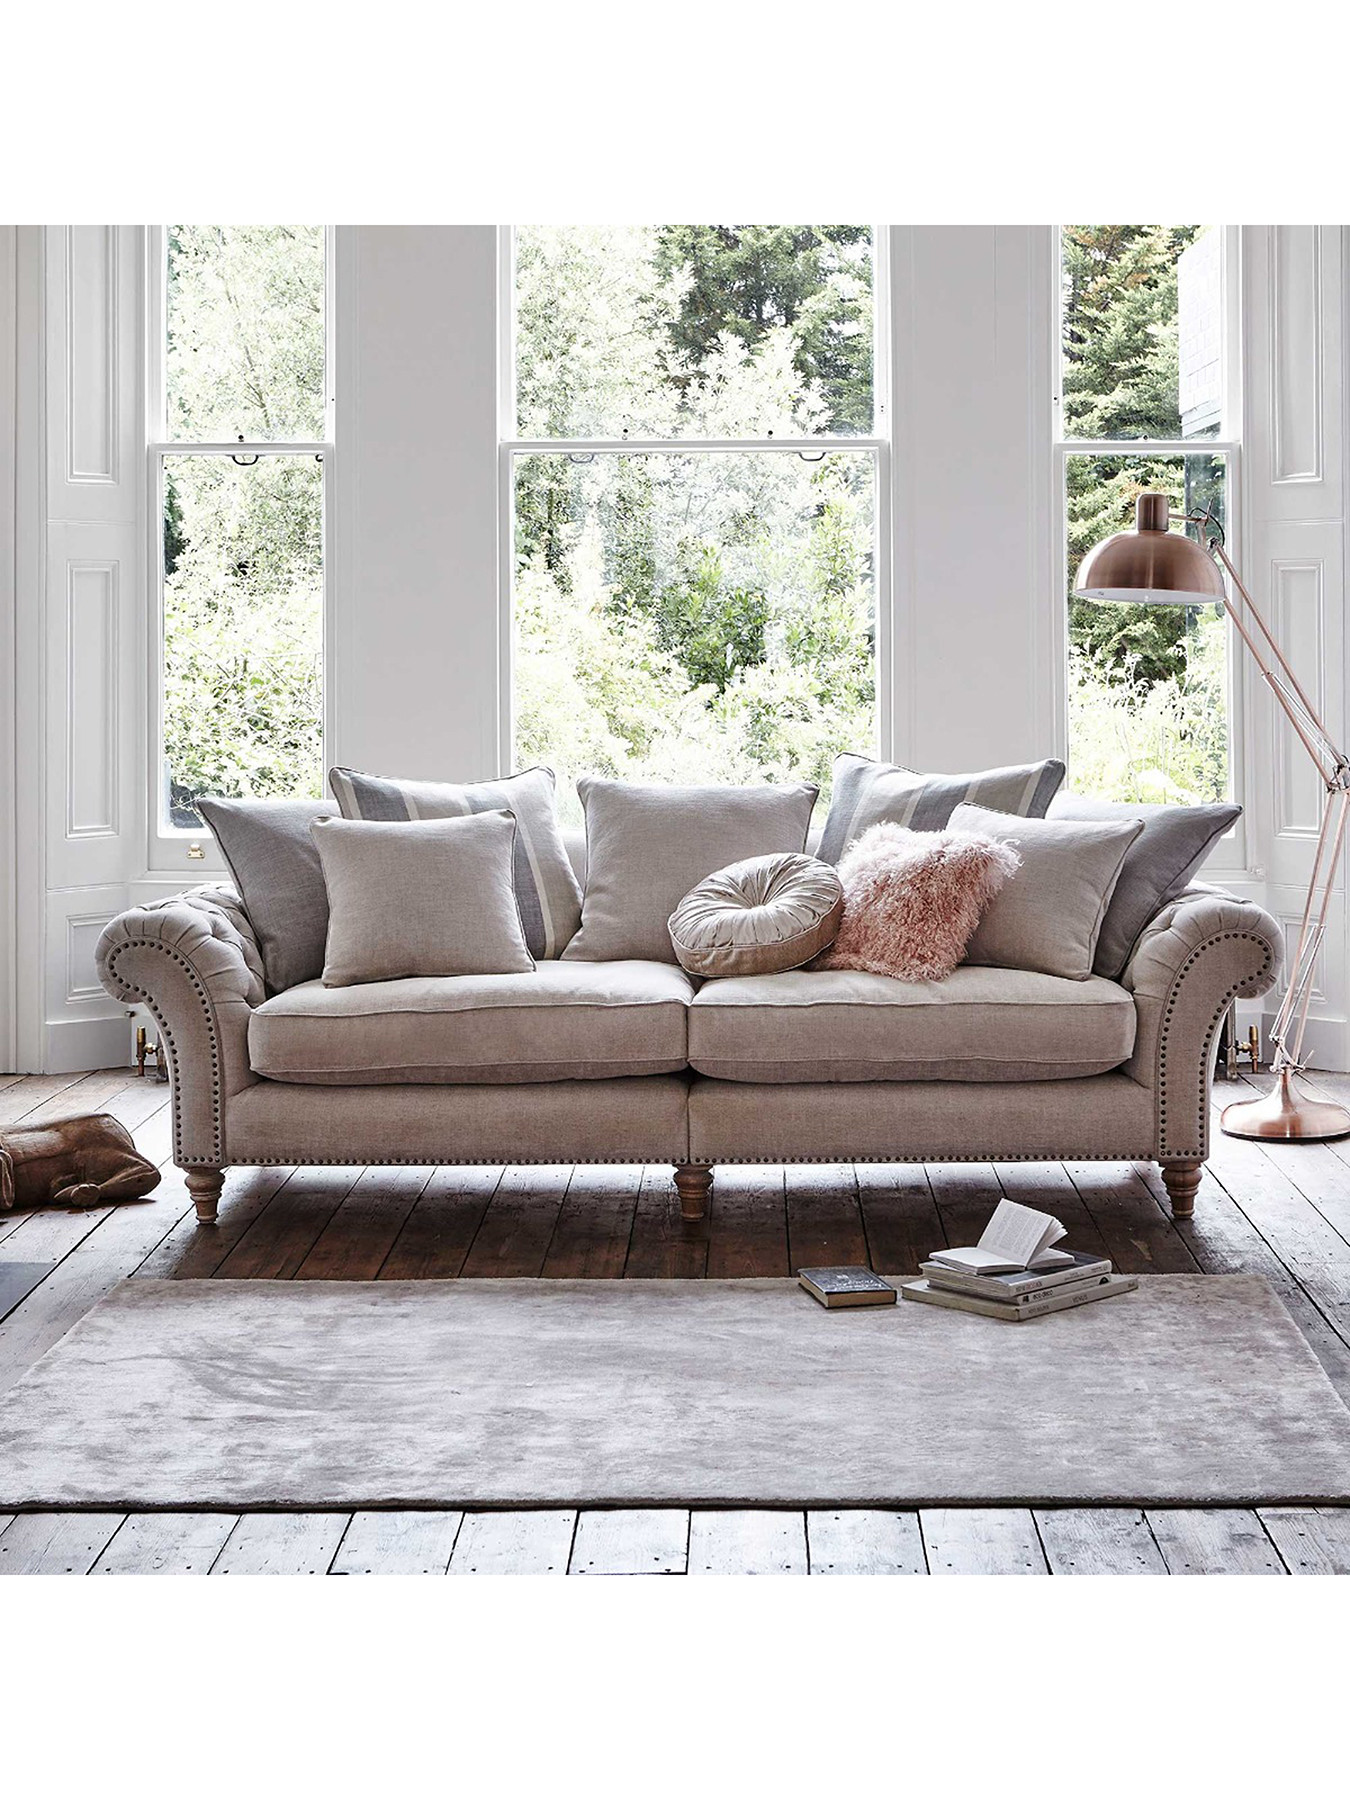 Barker and Stonehouse Craven Extra Large Sofa With Studs | Sofas | Fenwick